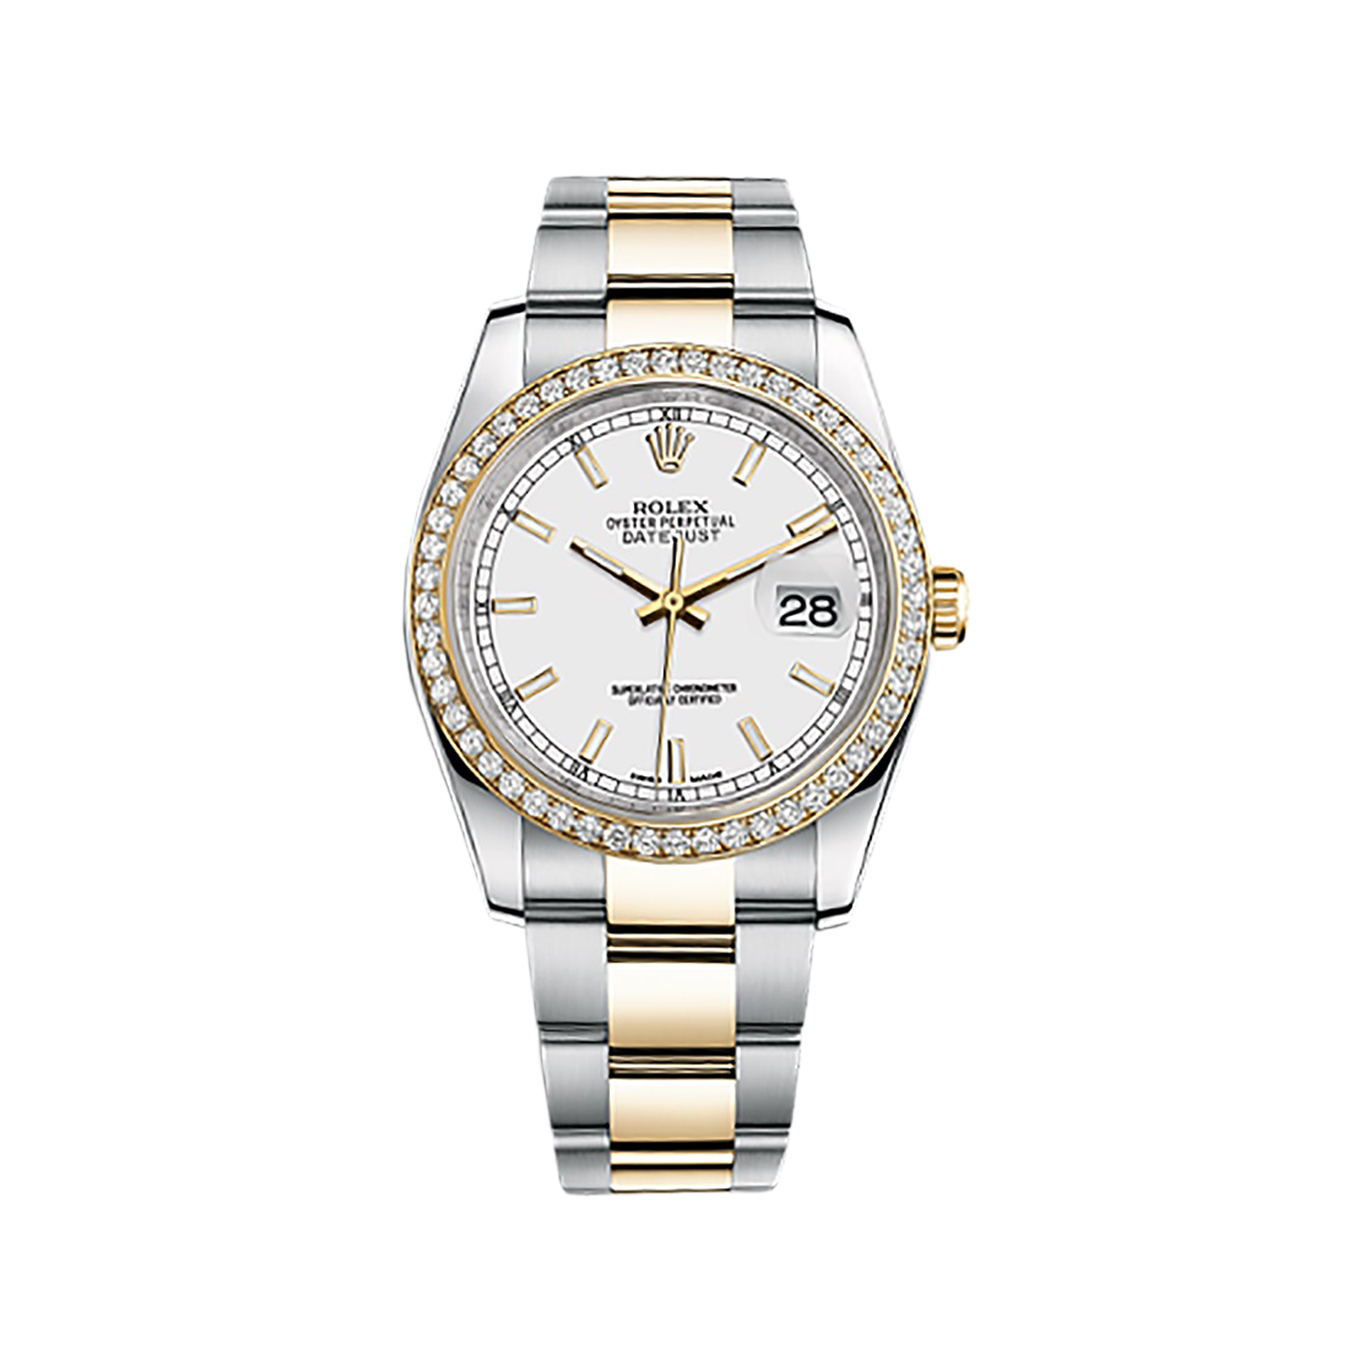 Datejust 36 116243 Gold & Stainless Steel Watch (White) - Click Image to Close